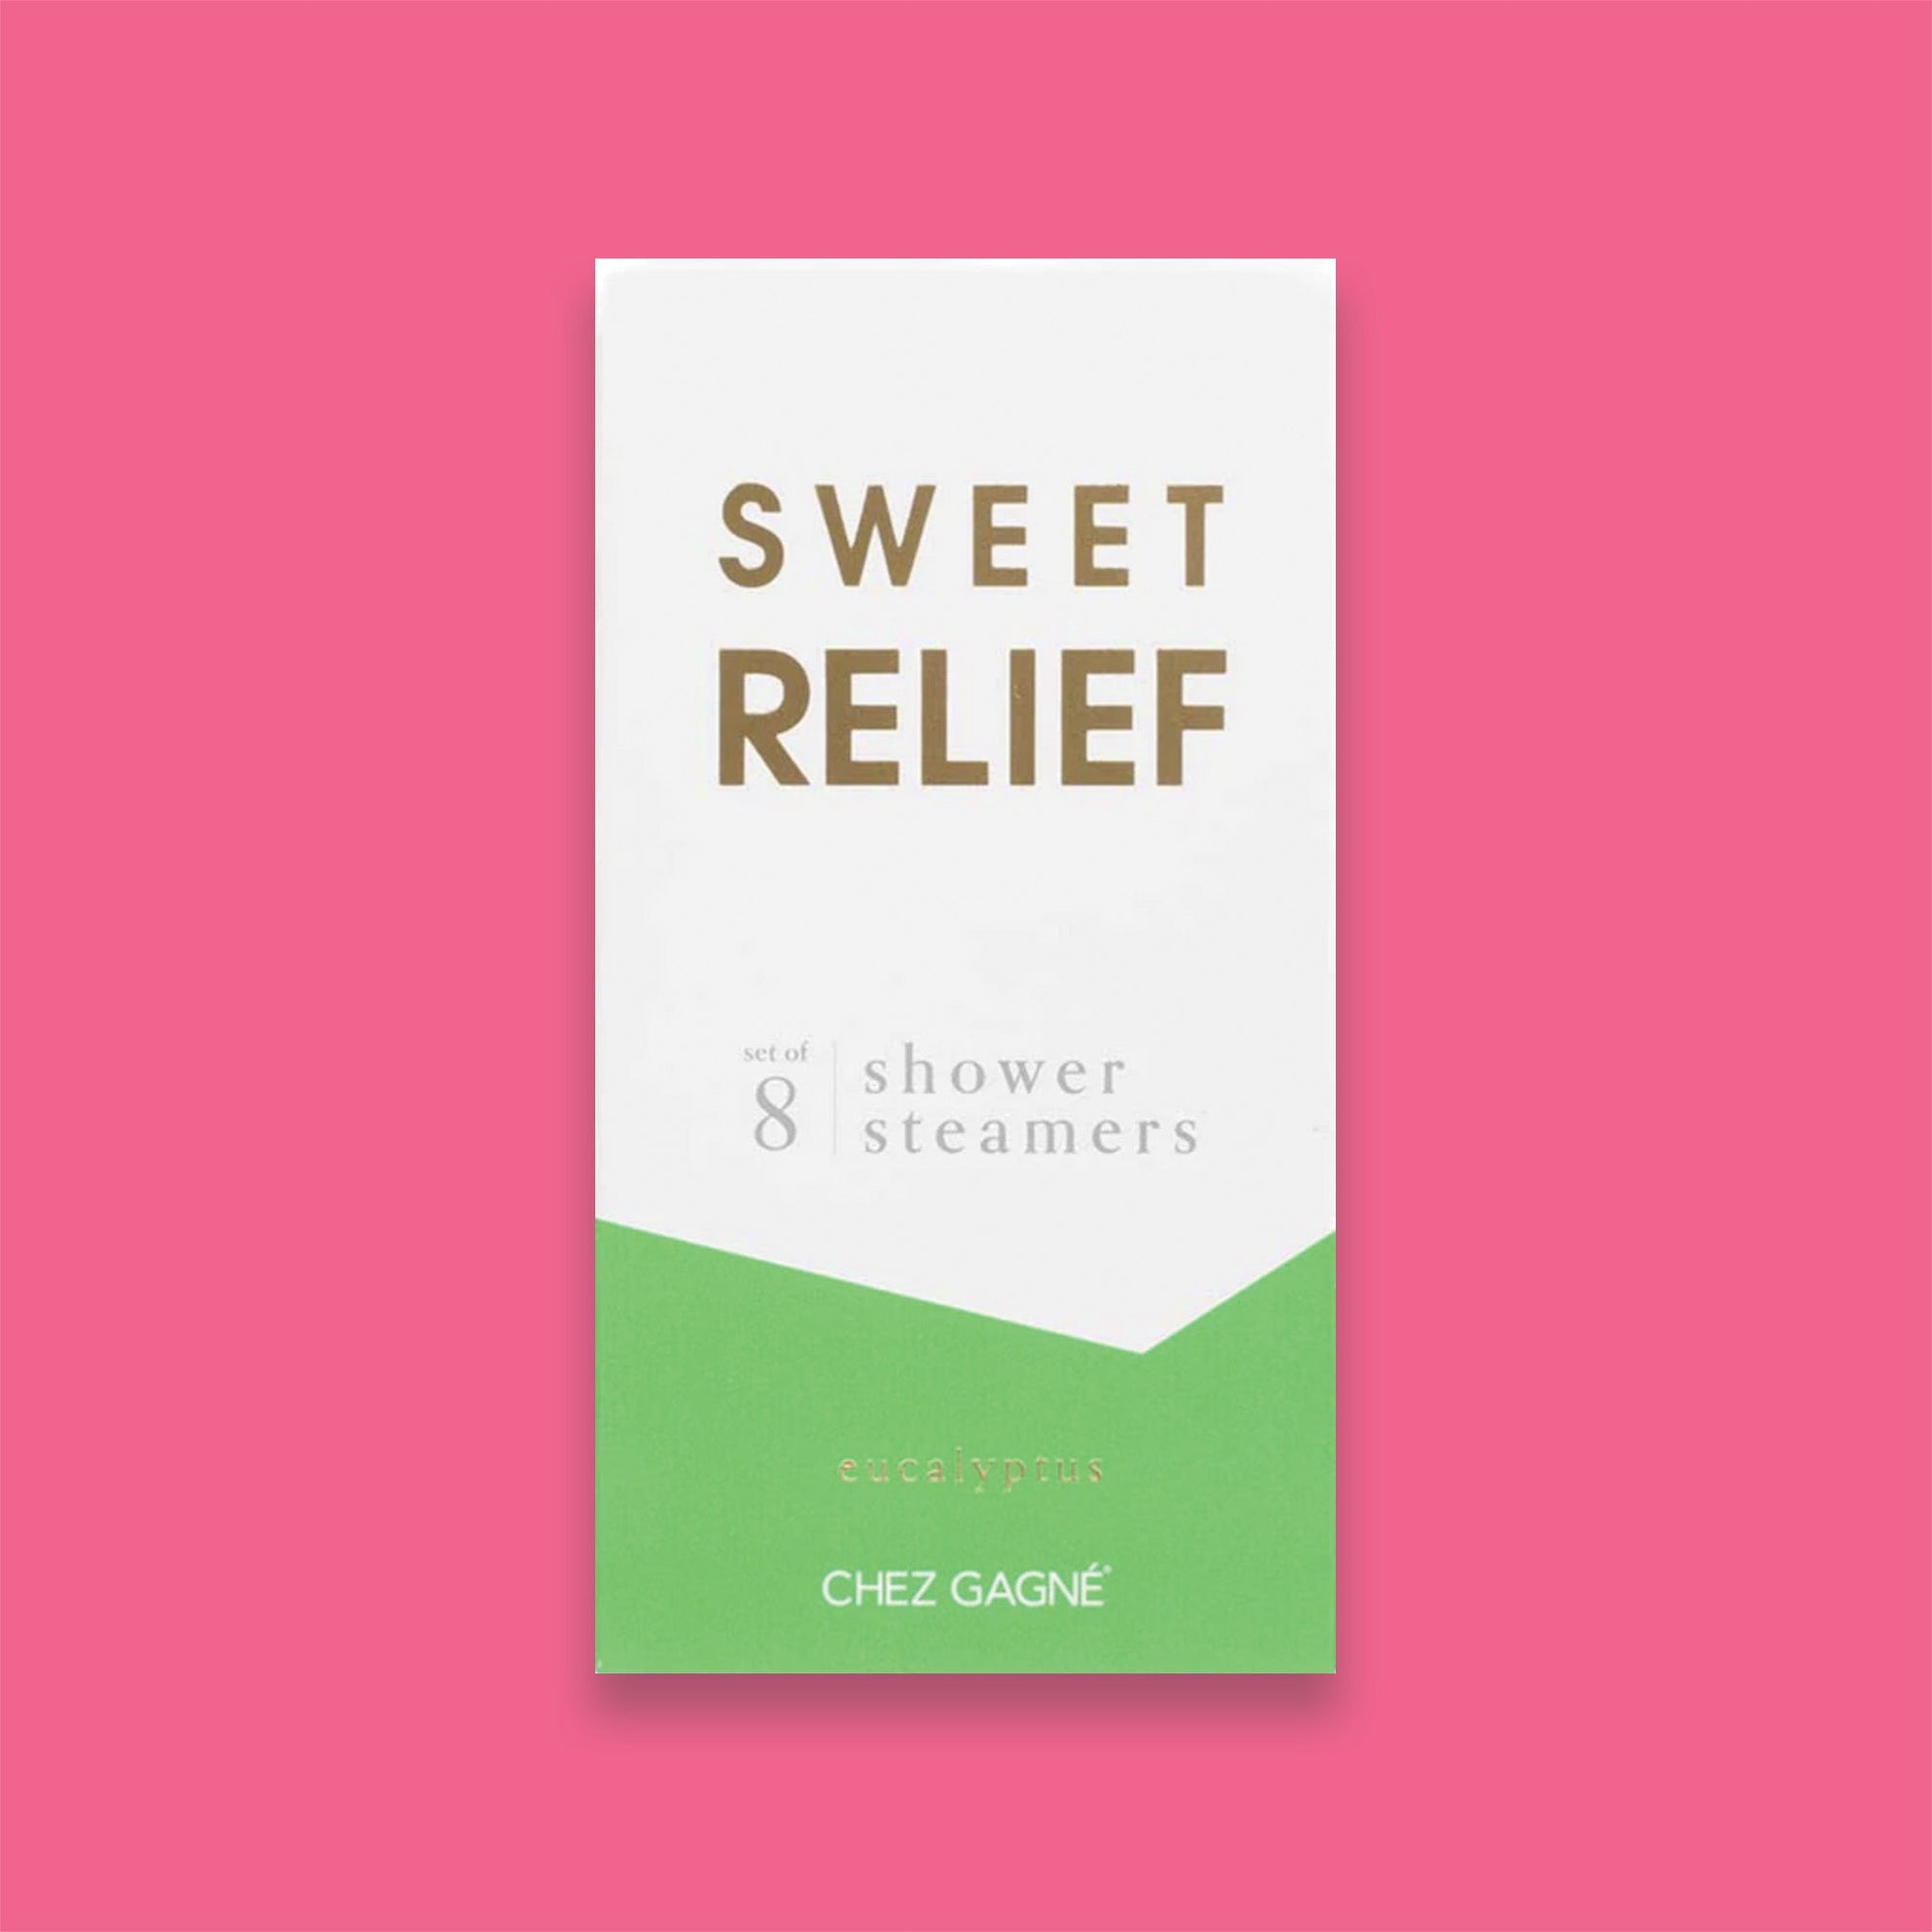 On a hot pink background sits a box. This picture is a close-up of a white and lime green package that says "SWEET RELIEF" in gold foil, all caps block lettering. Under it says "set of 8" and " shower steamers" in grey, lowercase serif font. At the bottom it says "eucalyptus" in gold foil, lower case serif font.